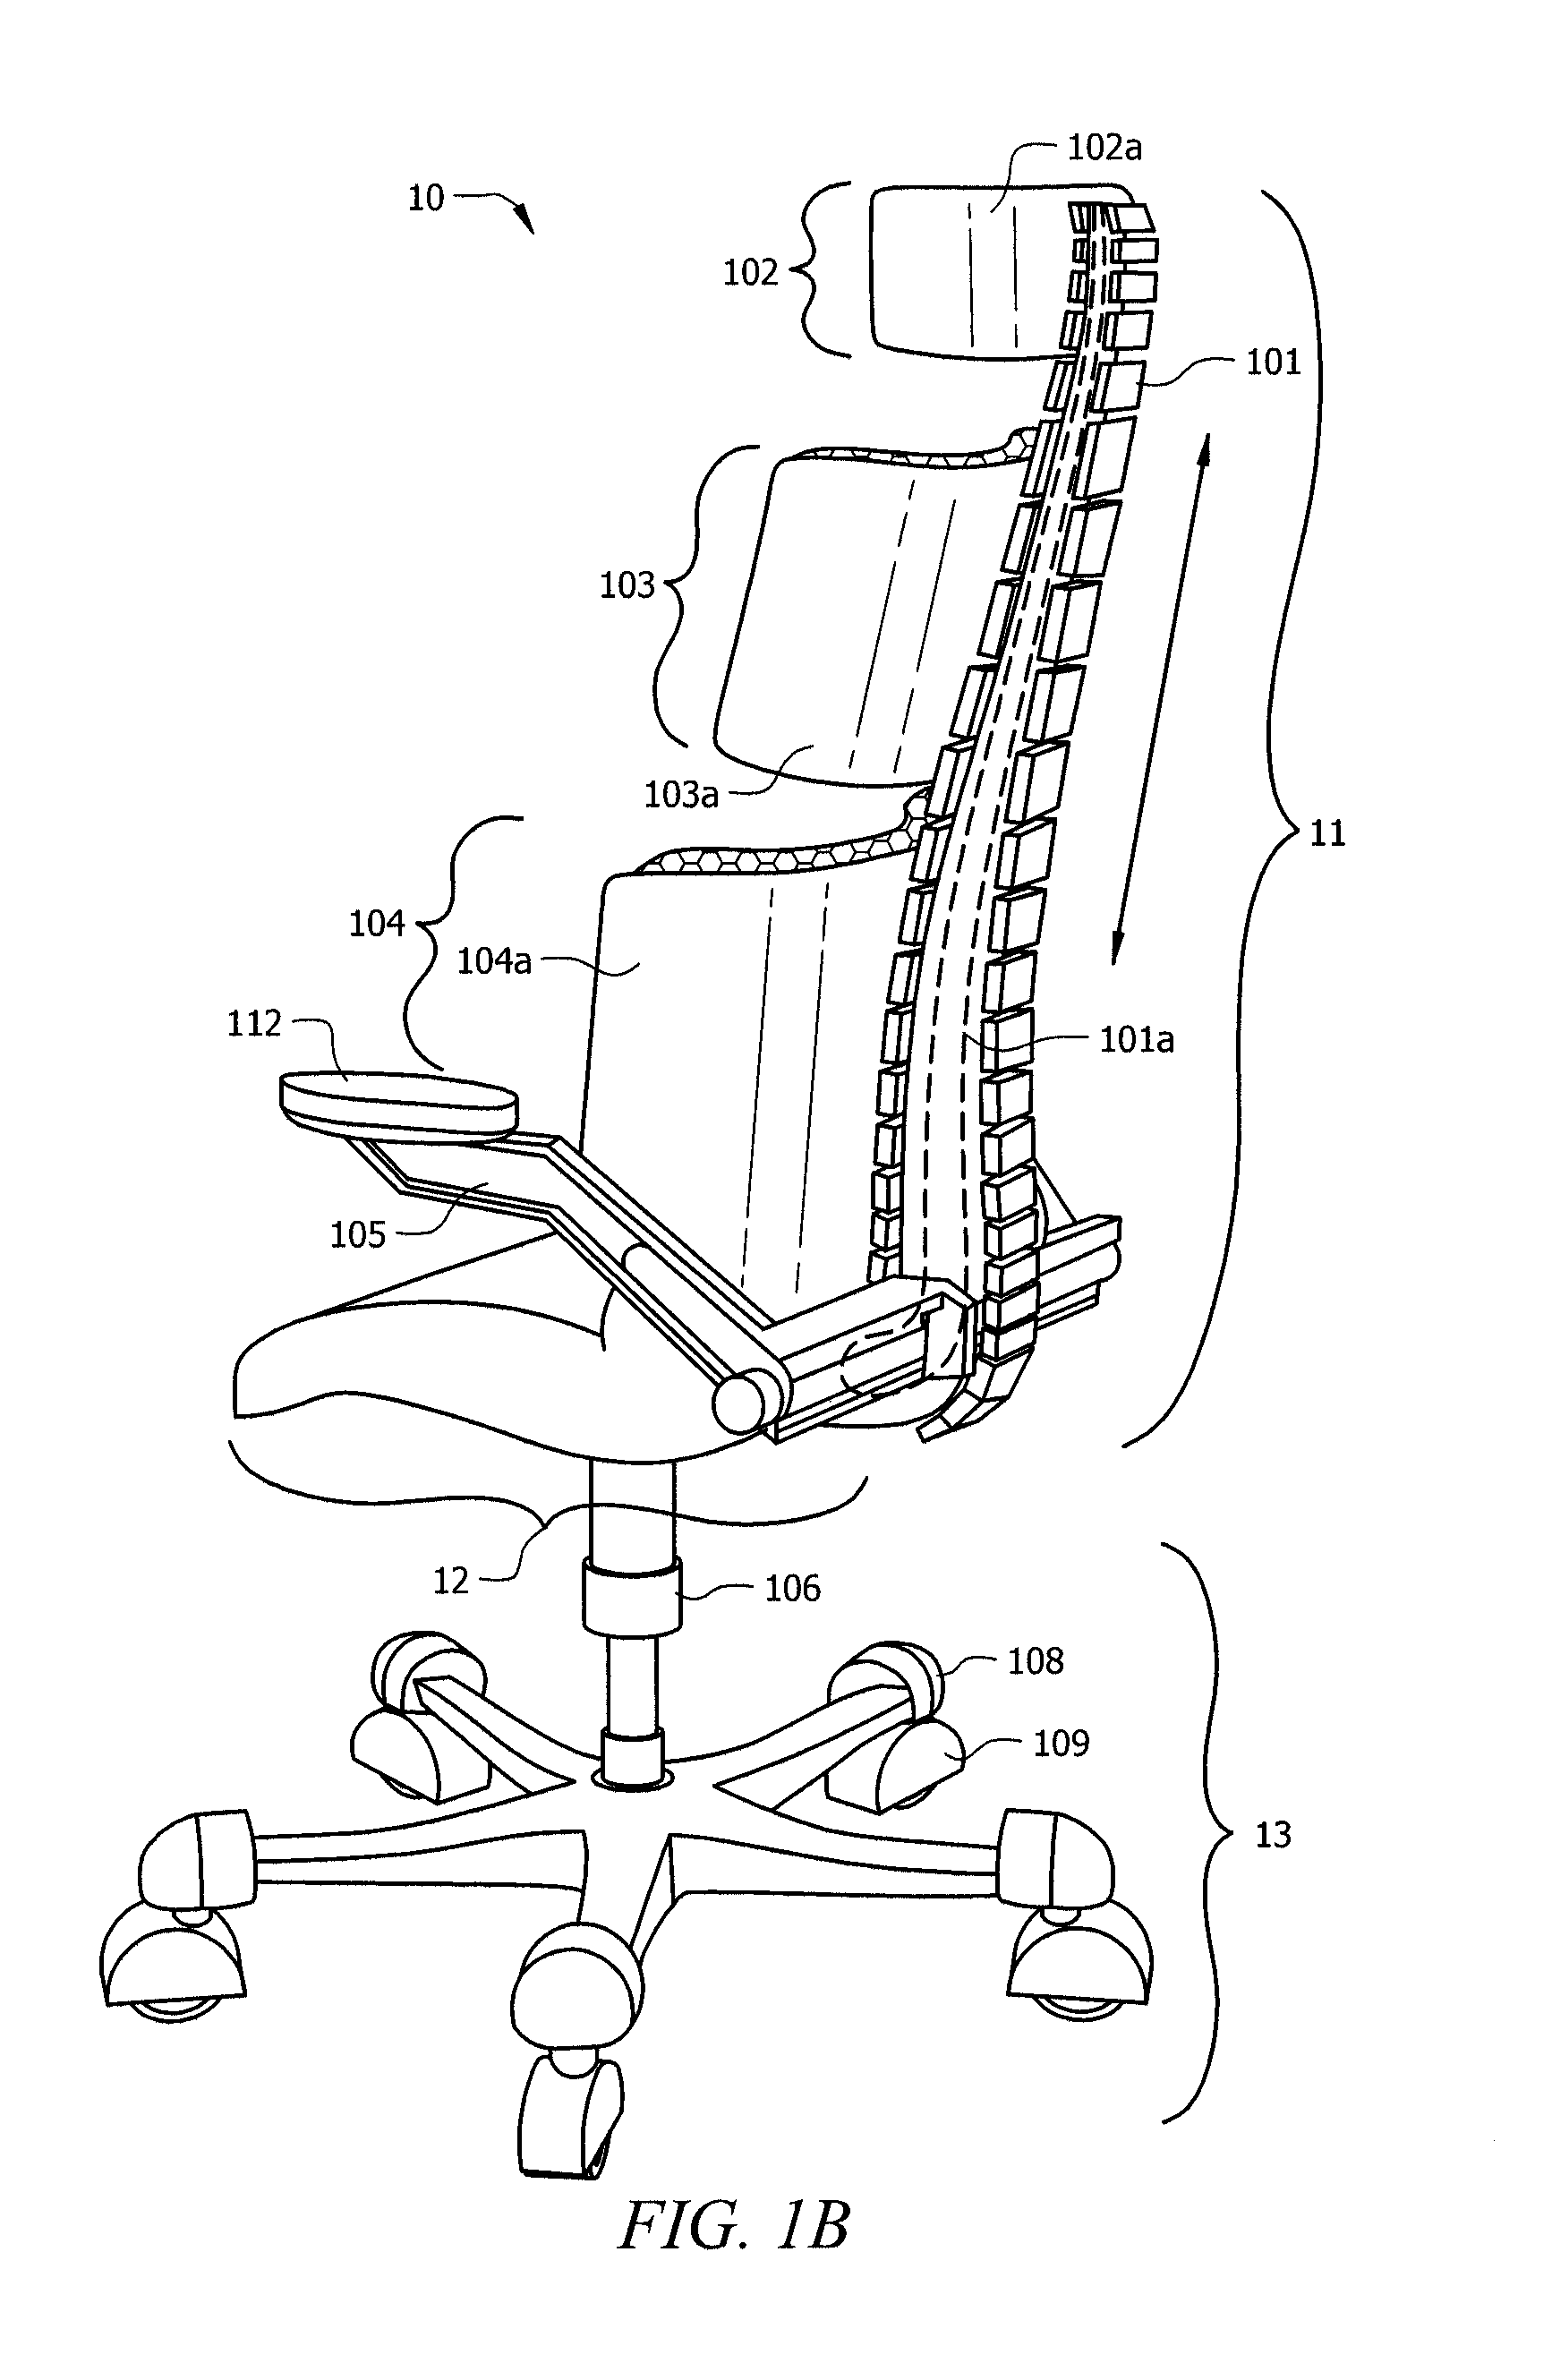 Systems and methods for providing ergonomic exercise chairs